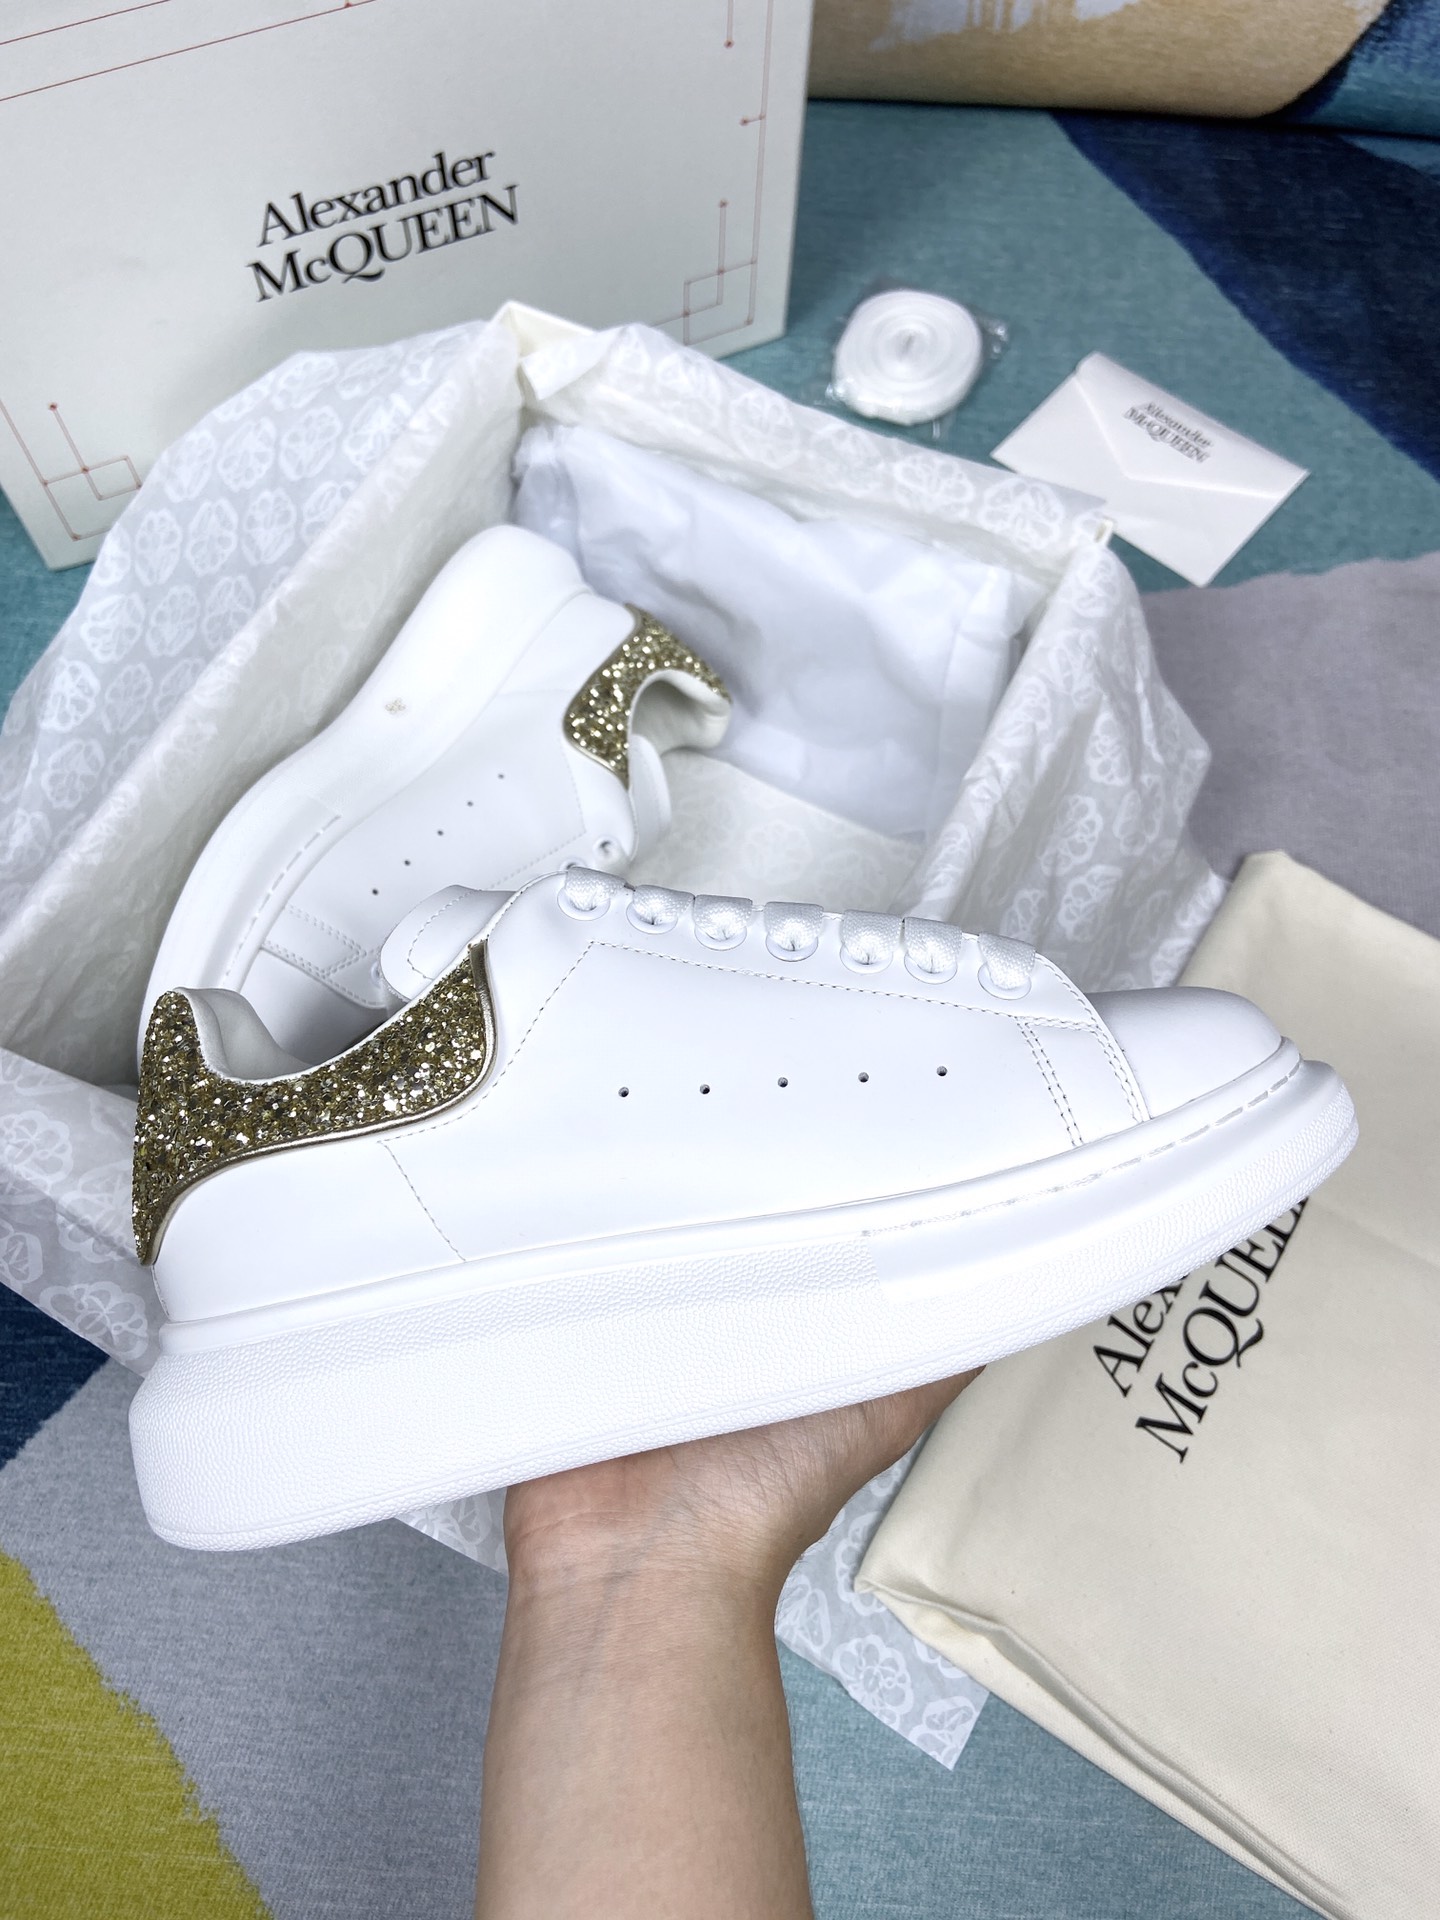 Alexander McQueen Skateboard Shoes Gold White Yellow Cowhide